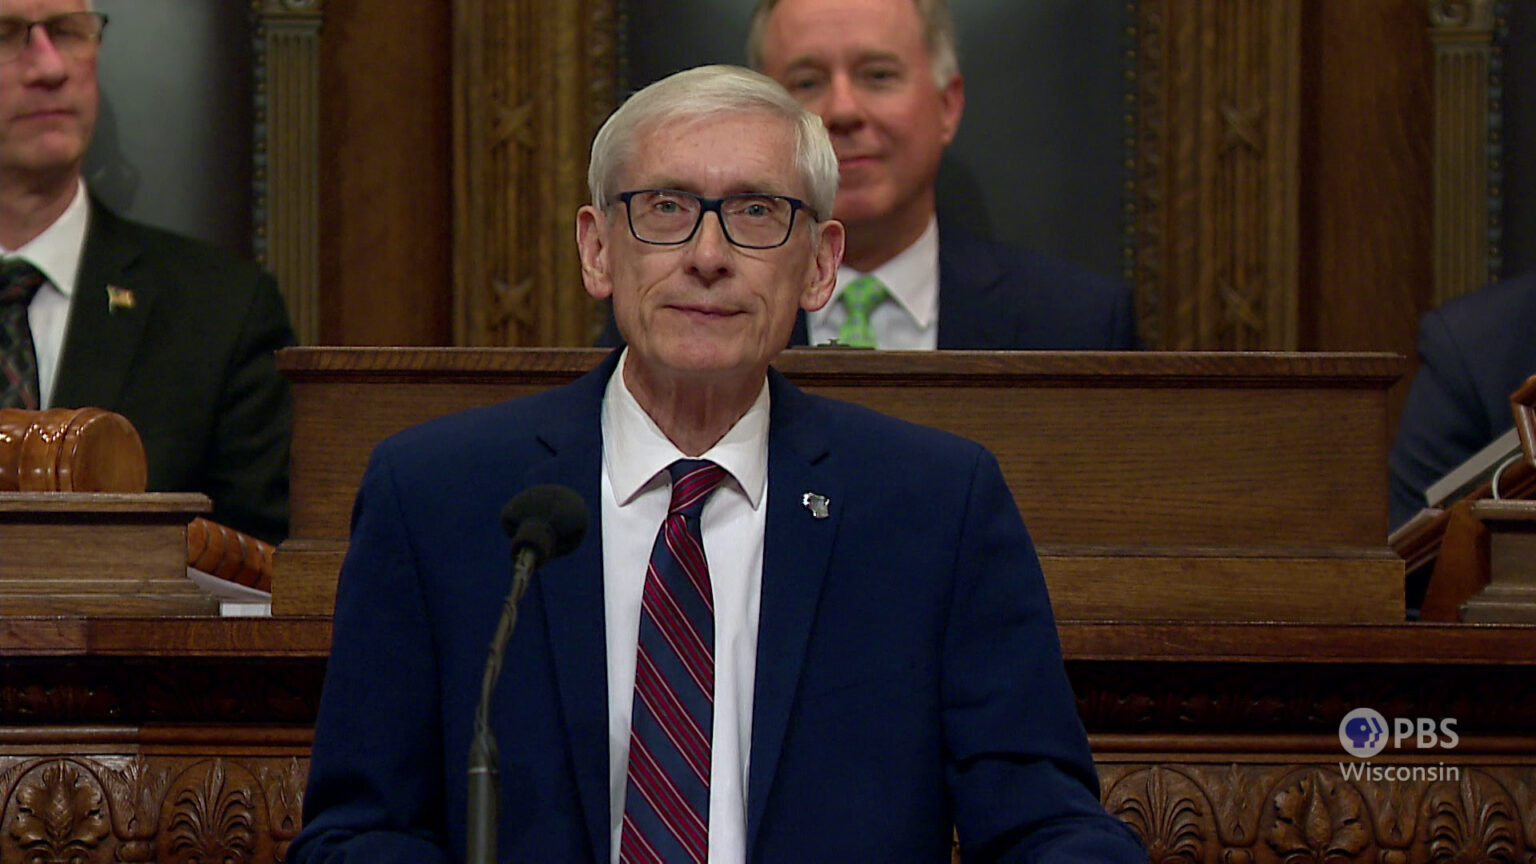 Tony Evers stands and speaks into a microphone with Robin Vos seated at a dais behind him.